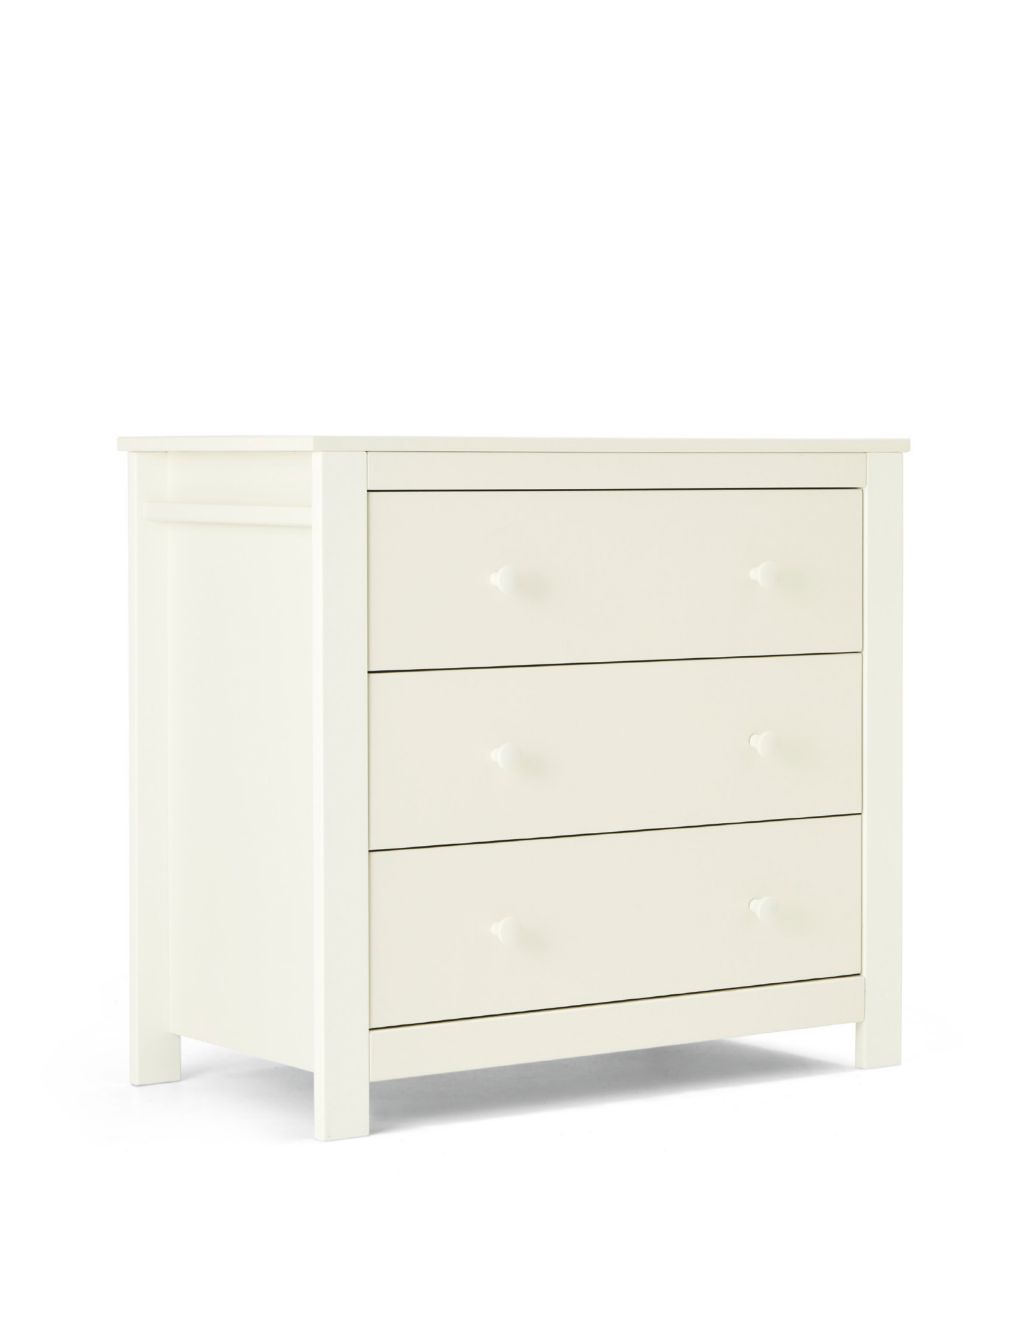 Mia 3 Piece Cotbed Range with Dresser and Wardrobe image 5